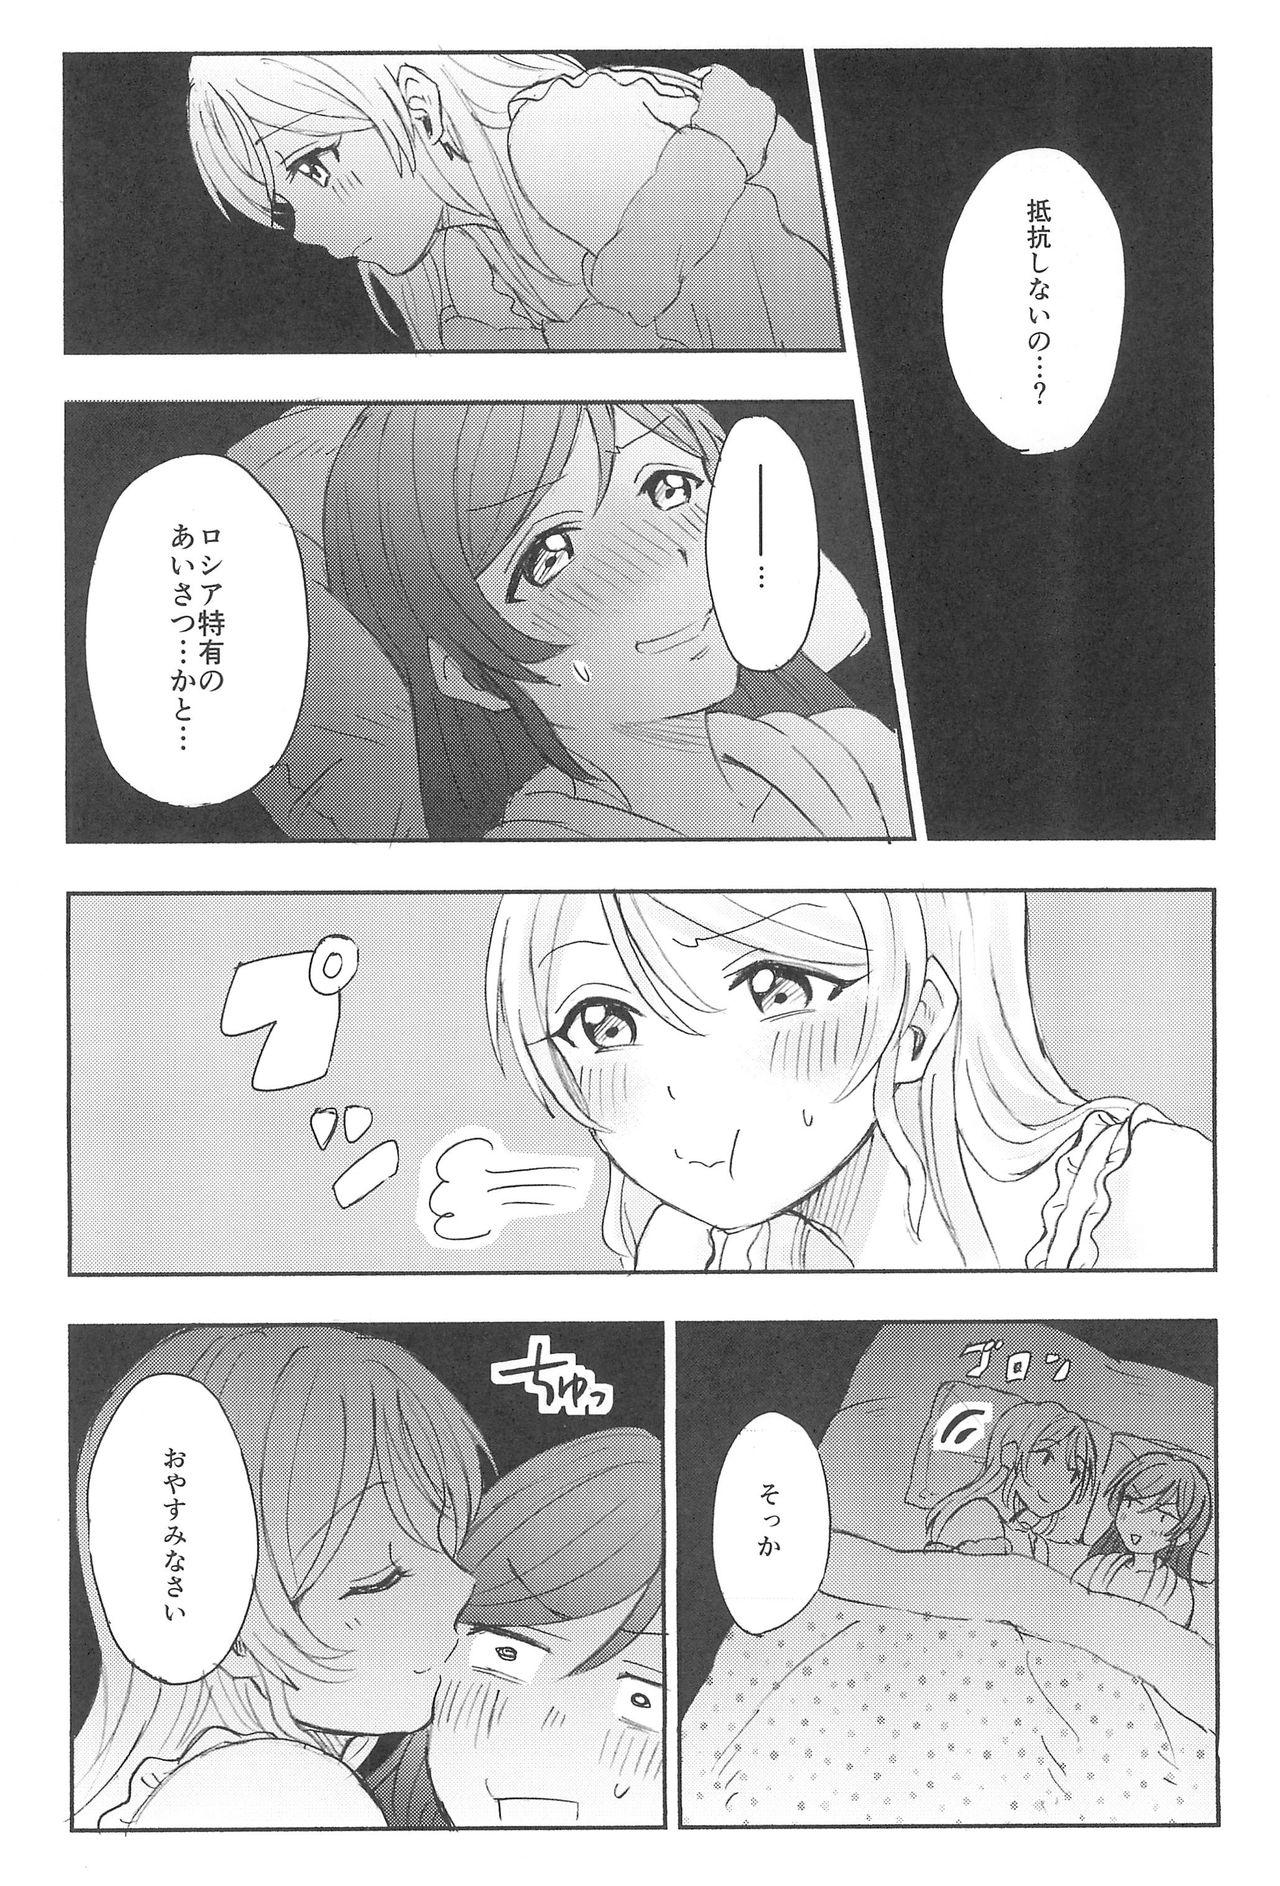 Parties Unbalance Emotional Heart - Love live Hymen - Page 12